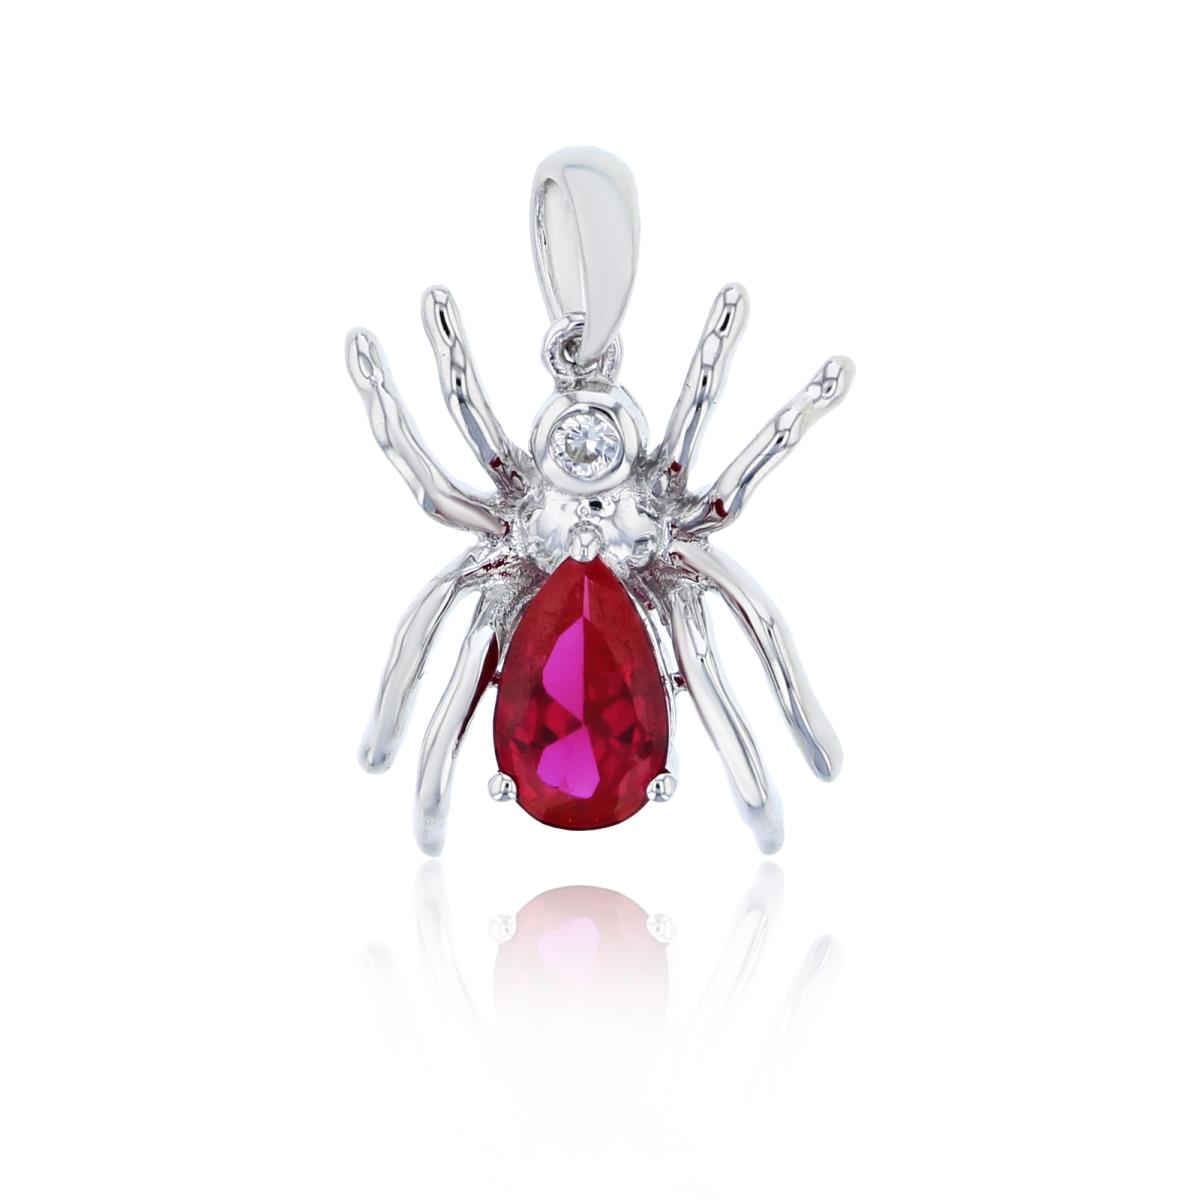 14K White Gold 8x6mm PS Glass Field Ruby & 2mm Rnd White Topaz Spider 18"Necklace